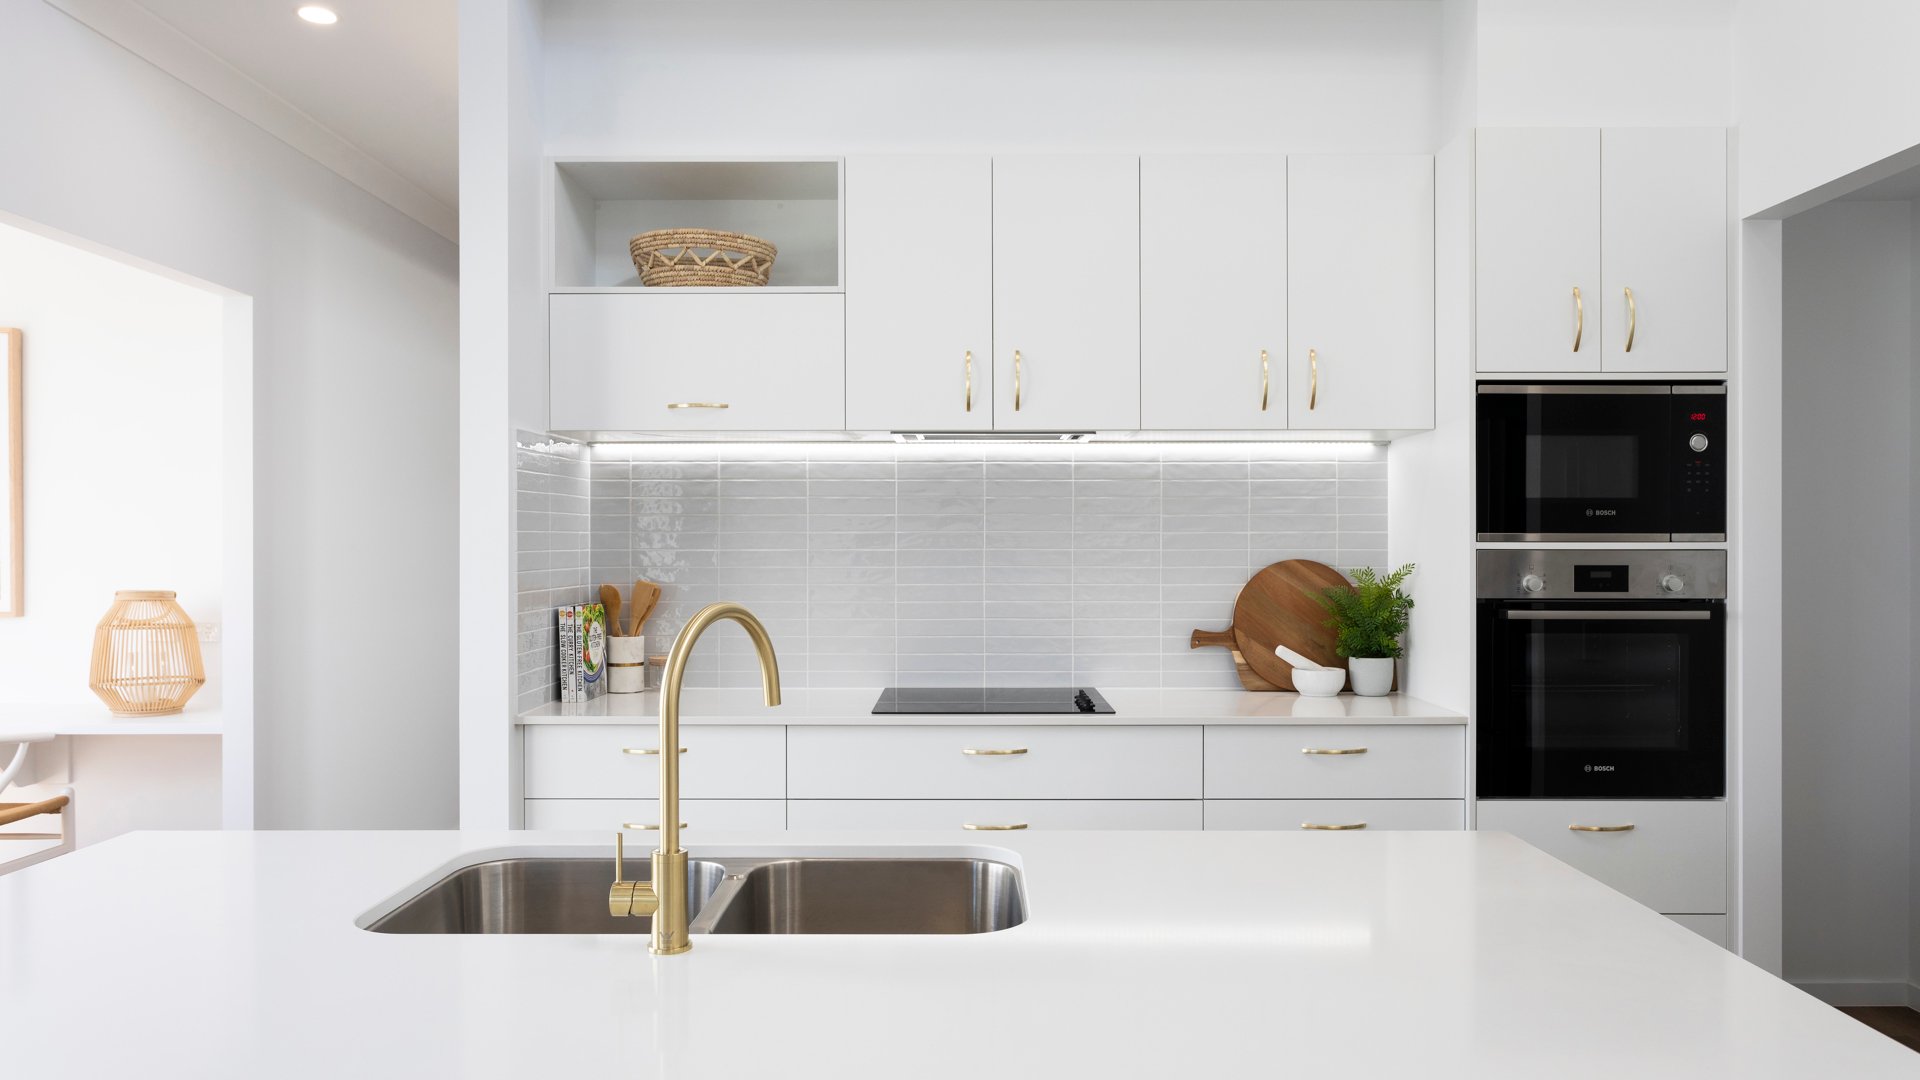 Beautiful modern interior kitchen display at a Stockland Halcyon community